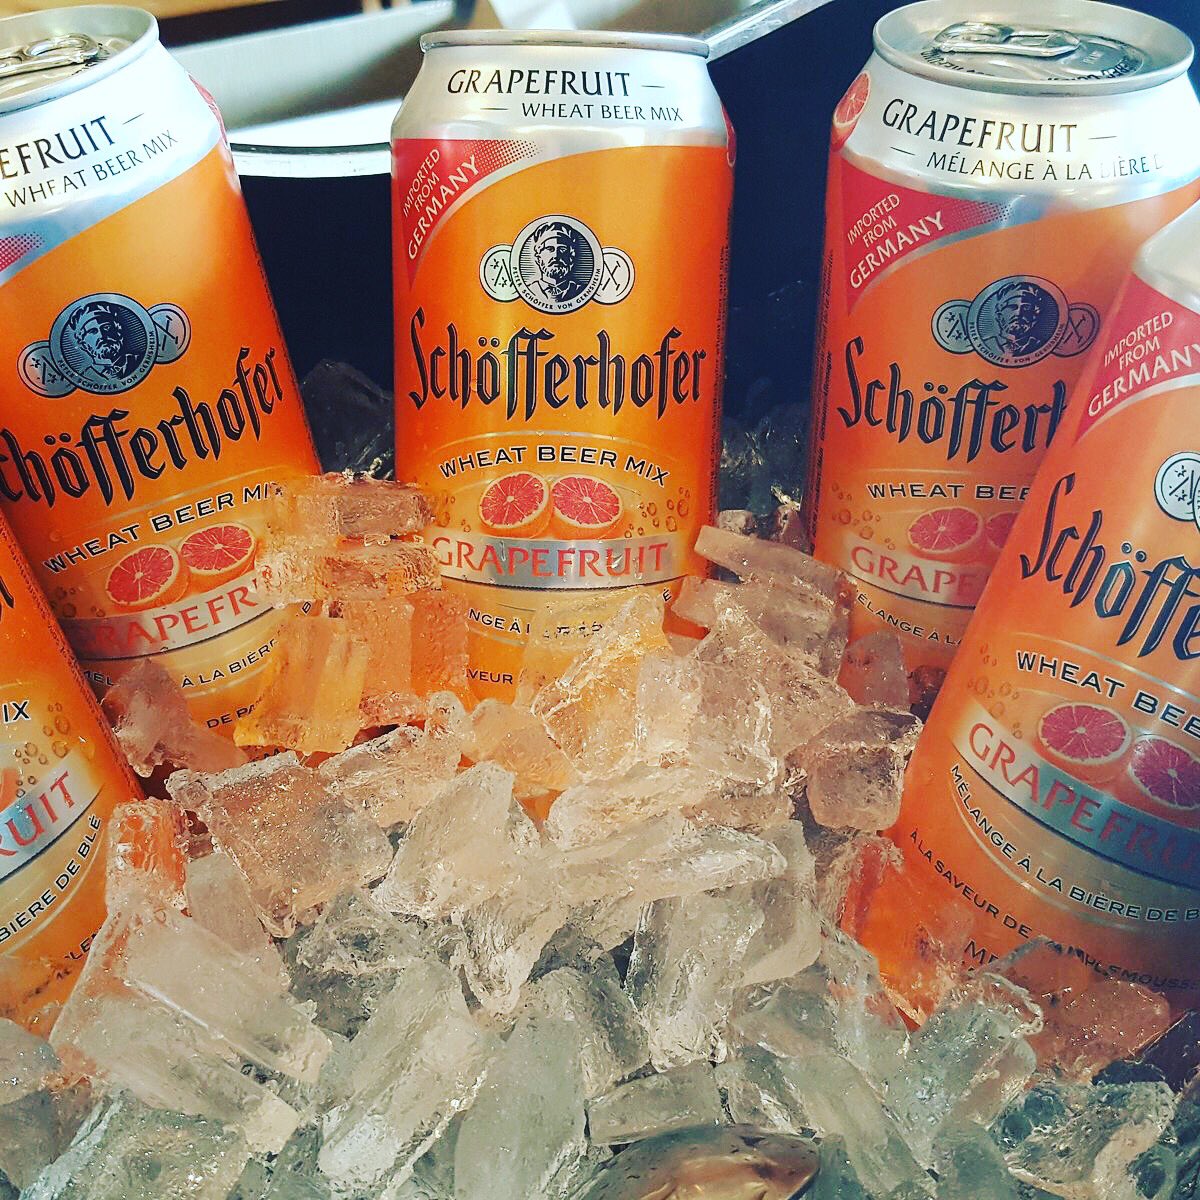 Perfect #cryotherapy for a hot day like today! #schofferhofergrapefruit #grapefruit